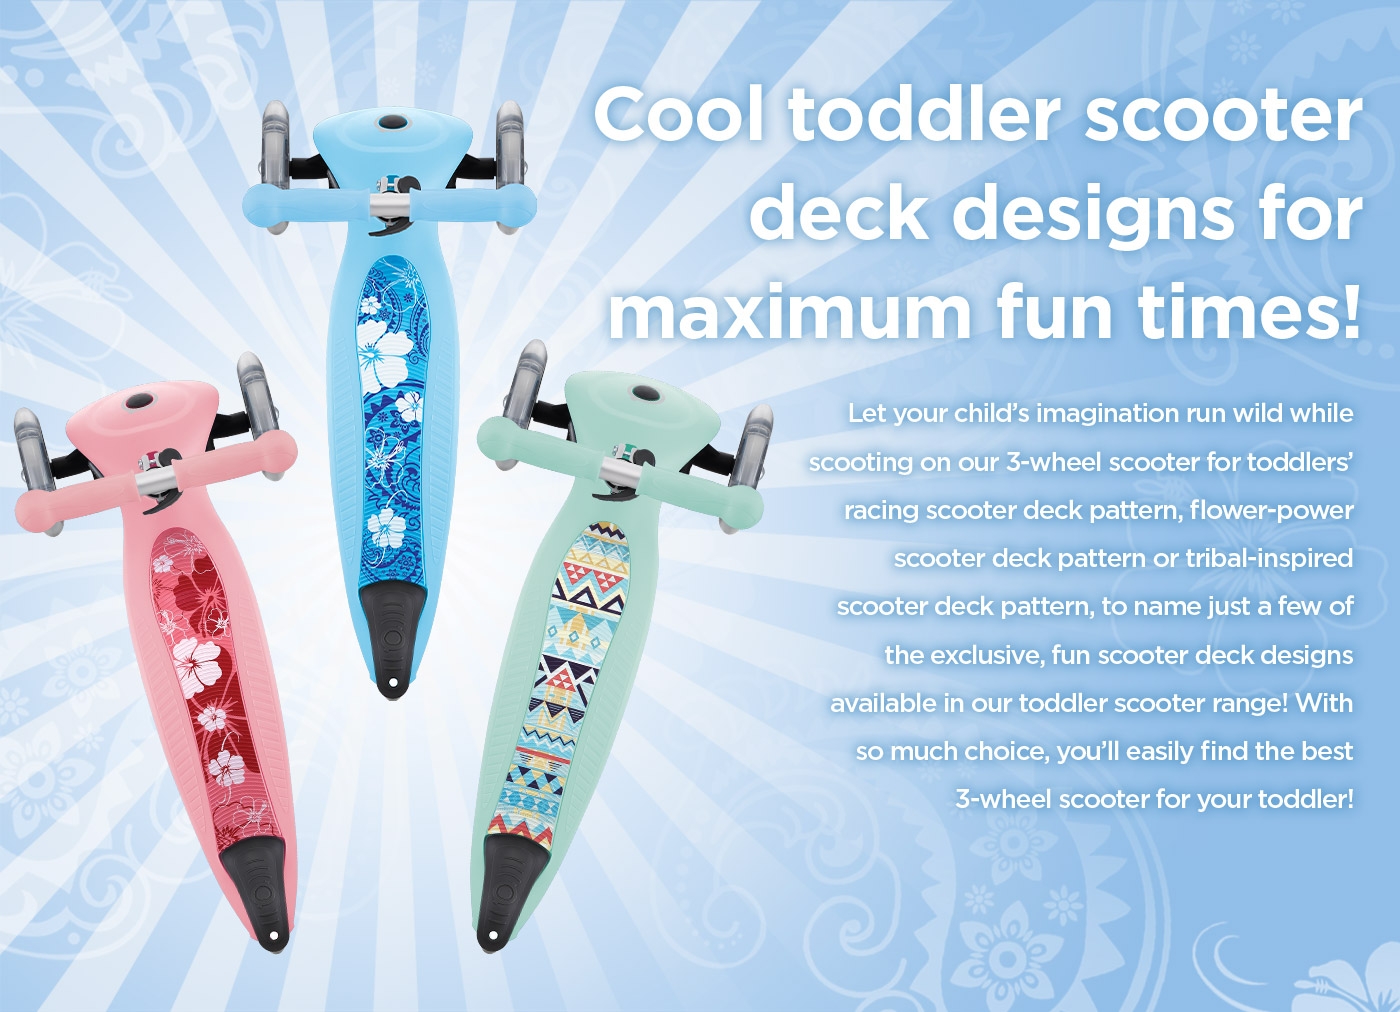 Cool toddler scooter deck designs for maximum fun times! Let your child’s imagination run wild while scooting on our 3-wheel scooter for toddlers’ racing scooter deck pattern, flower-power scooter deck pattern or tribal-inspired scooter deck pattern, to name just a few of the exclusive, fun scooter deck designs available in our toddler scooter range! With so much choice, you’ll easily find the best 3-wheel scooter for your toddler!  